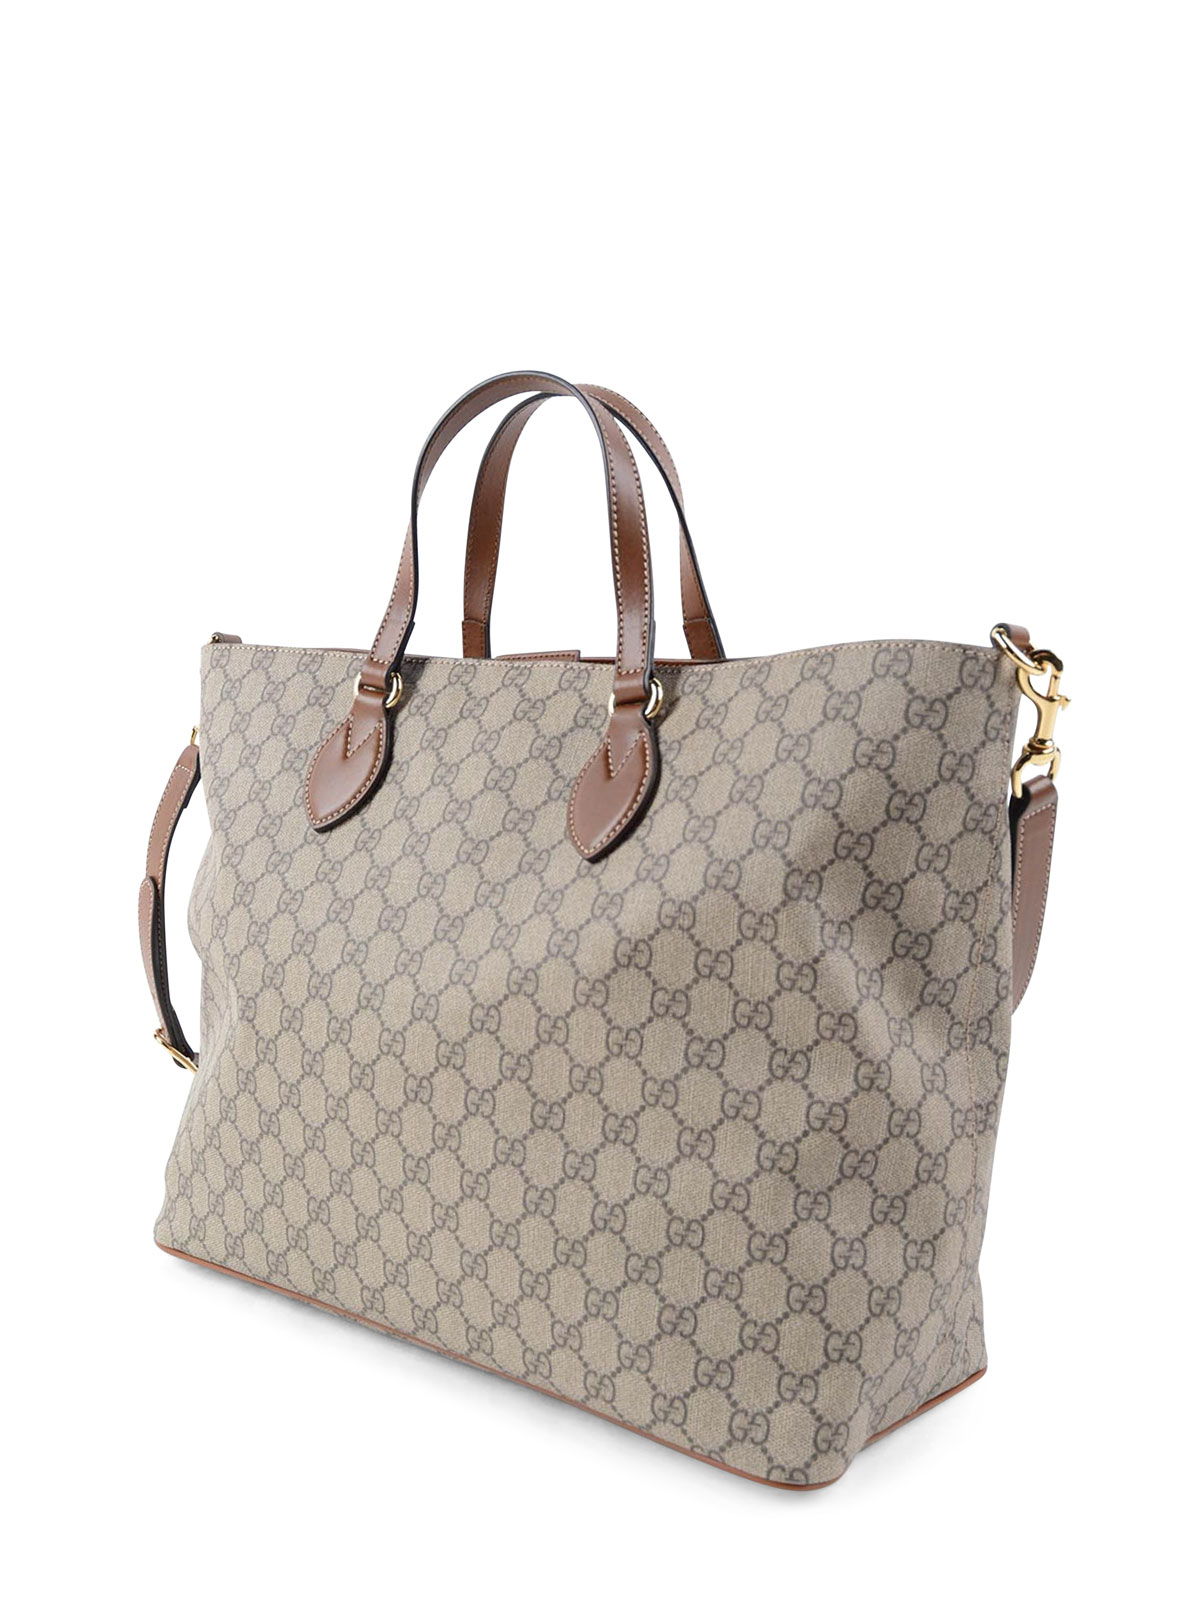 GG Supreme canvas tote bag by Gucci - totes bags | Shop online at mediakits.theygsgroup.com